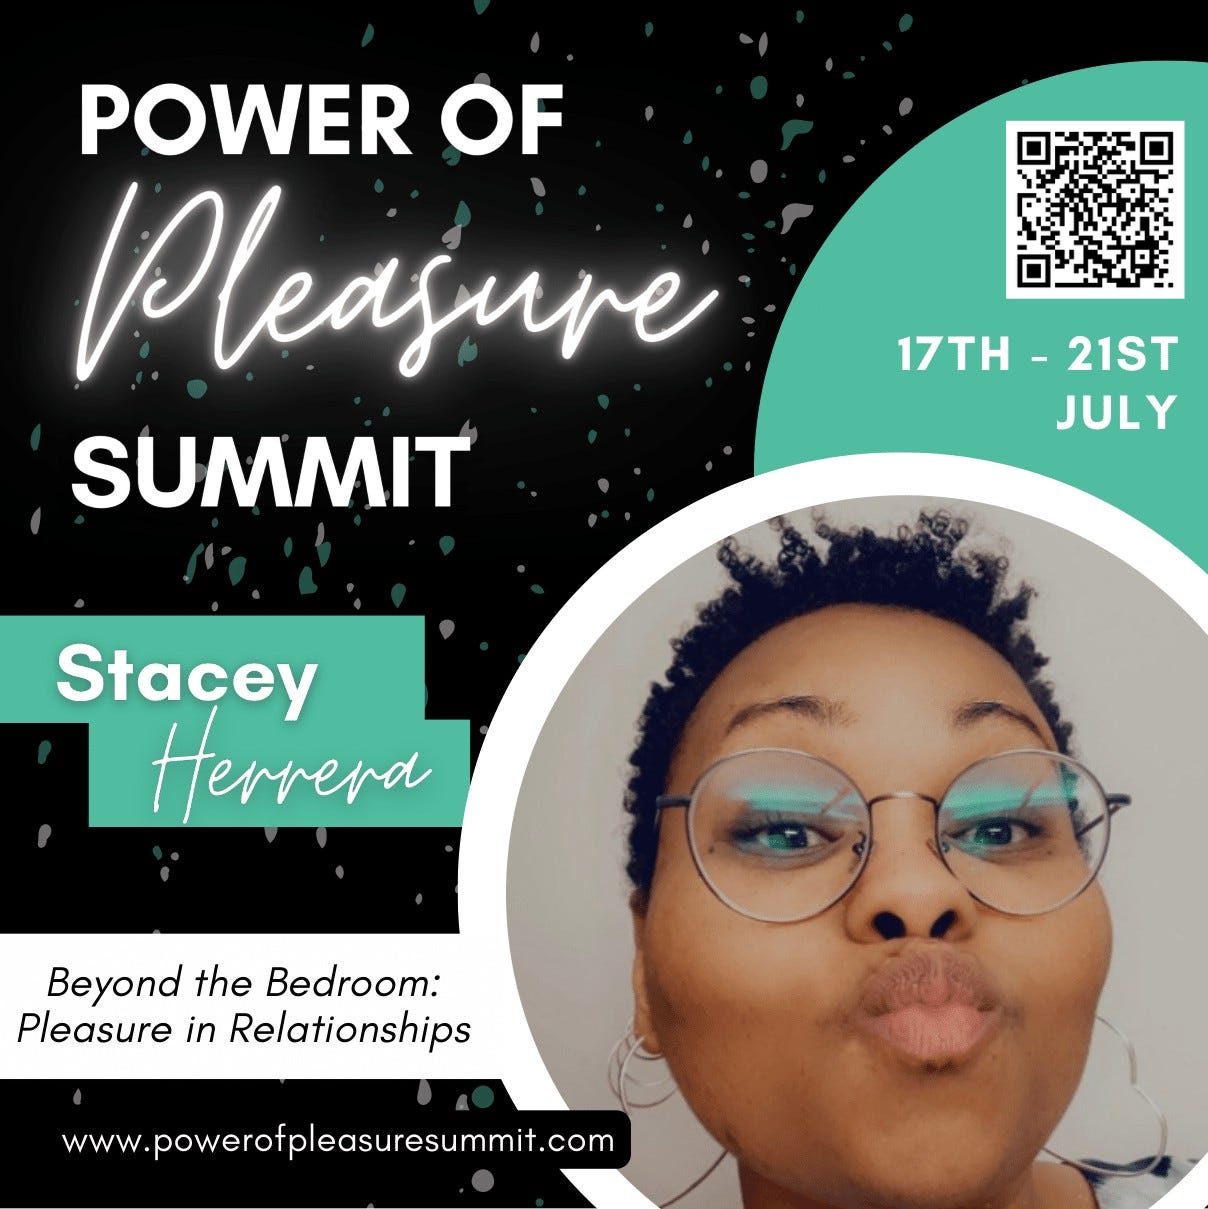 Black, green, and white image of Stacey Herrera for the Power of Pleasure Summit